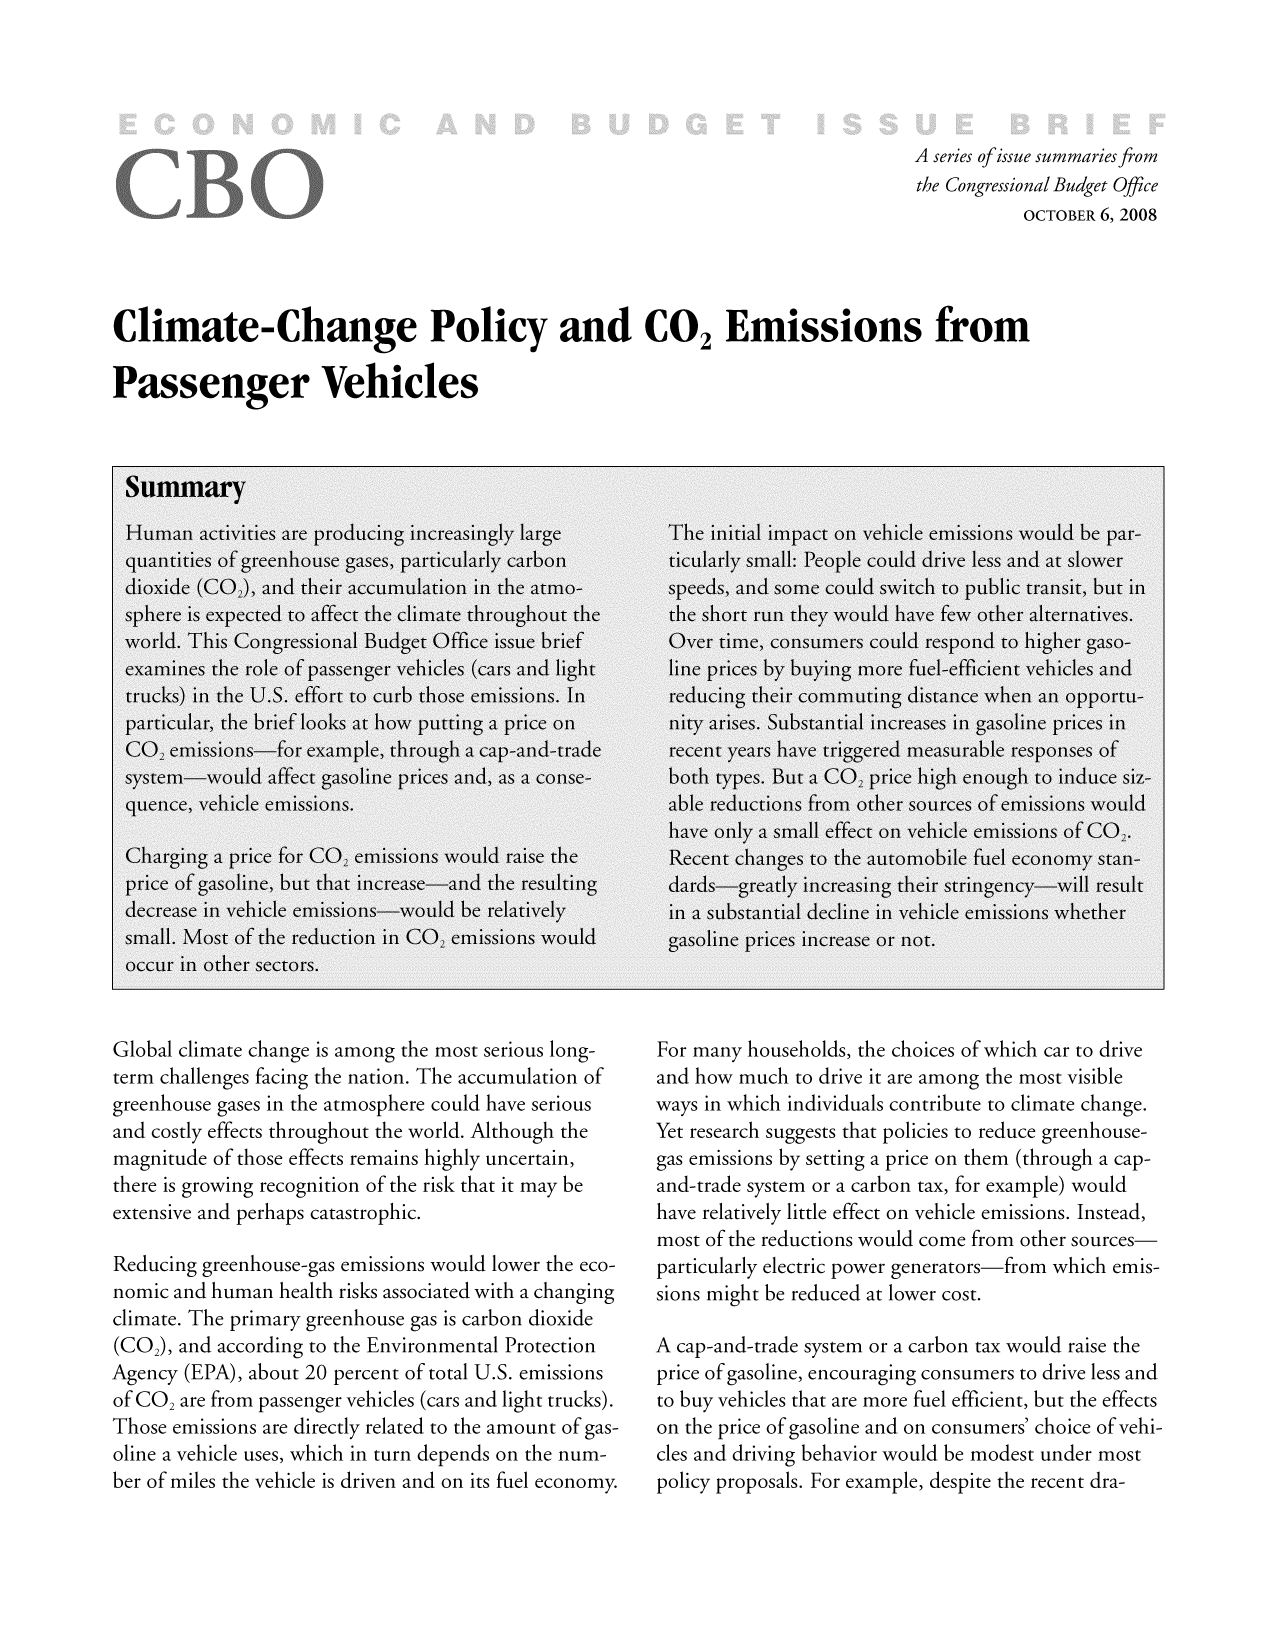 handle is hein.congrec/cbo8862 and id is 1 raw text is: A series ofissue summaries from
the Congressional Budget Office
OCTOBER 6, 2008
Climate-Change Policy and CO2 Emissions from
Passenger Vehicles

Global climate change is among the most serious long-
term challenges facing the nation. The accumulation of
greenhouse gases in the atmosphere could have serious
and costly effects throughout the world. Although the
magnitude of those effects remains highly uncertain,
there is growing recognition of the risk that it may be
extensive and perhaps catastrophic.
Reducing greenhouse-gas emissions would lower the eco-
nomic and human health risks associated with a changing
climate. The primary greenhouse gas is carbon dioxide
(CO2), and according to the Environmental Protection
Agency (EPA), about 20 percent of total U.S. emissions
of CO are from passenger vehicles (cars and light trucks).
Those emissions are directly related to the amount of gas-
oline a vehicle uses, which in turn depends on the num-
ber of miles the vehicle is driven and on its fuel economy.

For many households, the choices of which car to drive
and how much to drive it are among the most visible
ways in which individuals contribute to climate change.
Yet research suggests that policies to reduce greenhouse-
gas emissions by setting a price on them (through a cap-
and-trade system or a carbon tax, for example) would
have relatively little effect on vehicle emissions. Instead,
most of the reductions would come from other sources-
particularly electric power generators-from which emis-
sions might be reduced at lower cost.
A cap-and-trade system or a carbon tax would raise the
price of gasoline, encouraging consumers to drive less and
to buy vehicles that are more fuel efficient, but the effects
on the price of gasoline and on consumers' choice of vehi-
cles and driving behavior would be modest under most
policy proposals. For example, despite the recent dra-


